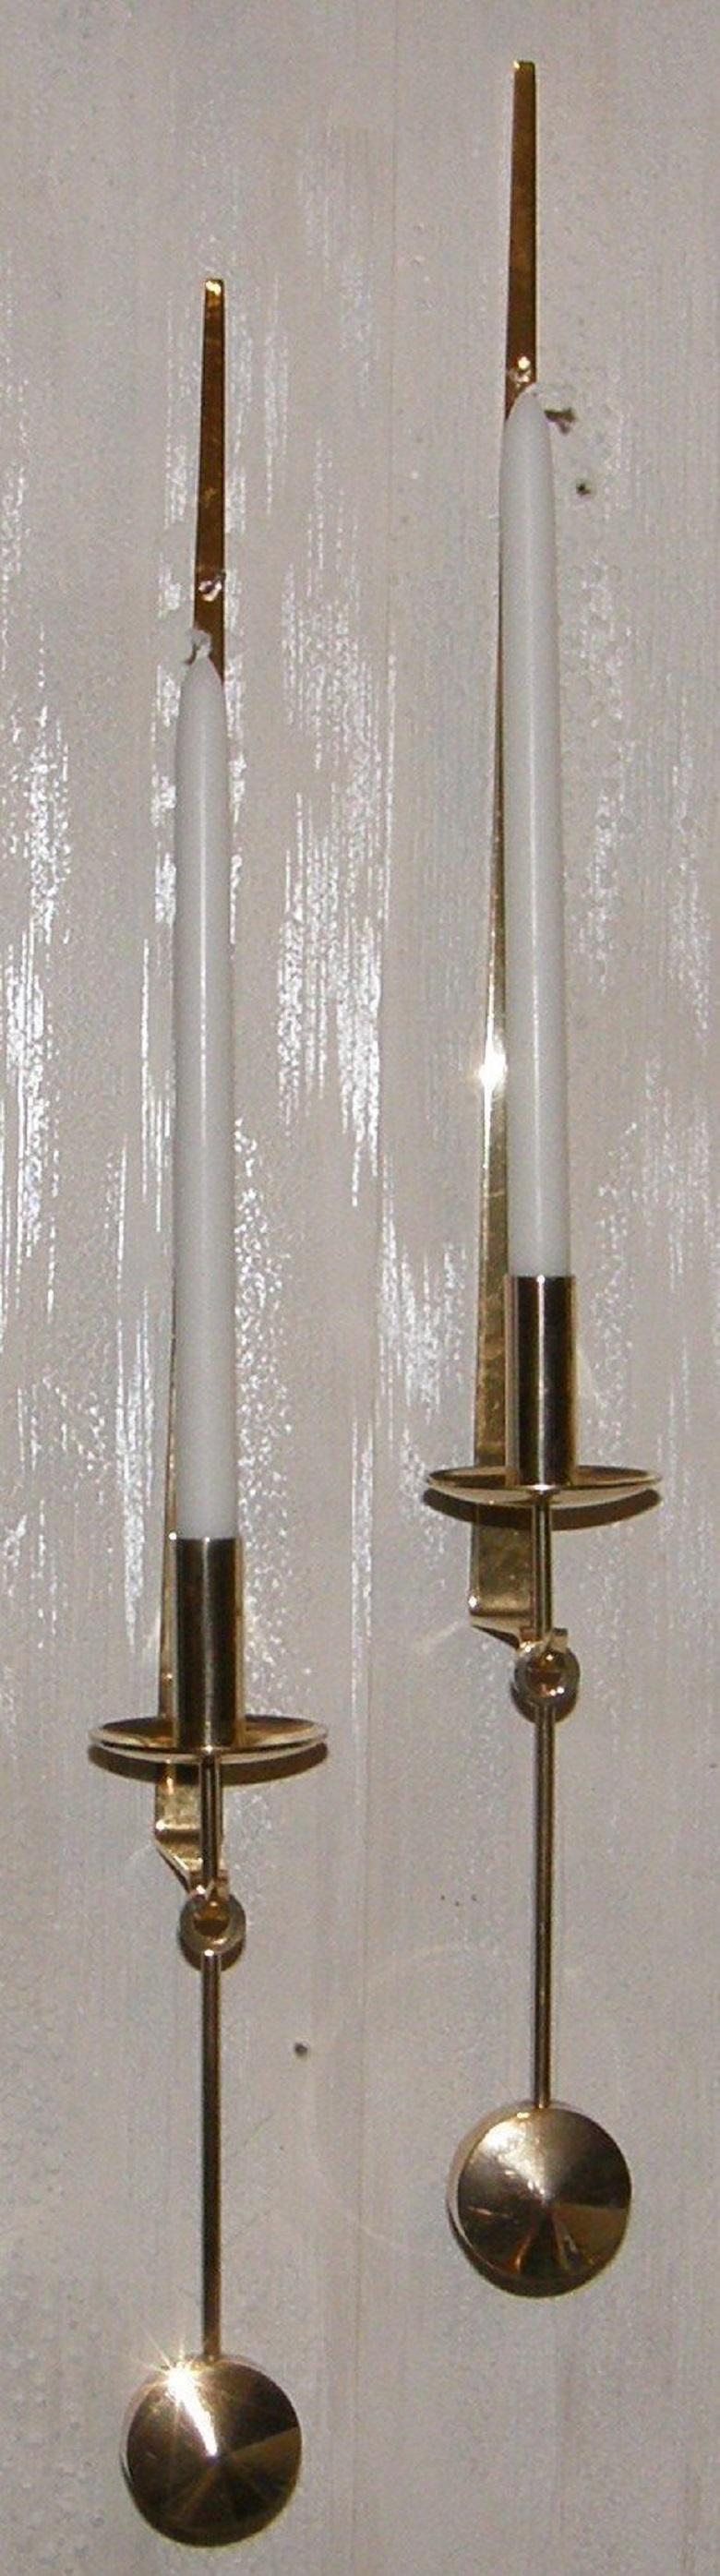 20th Century Pair of Vintage Scandinavian Brass Candlesticks by Pierre Forsell, 1960 Sweden